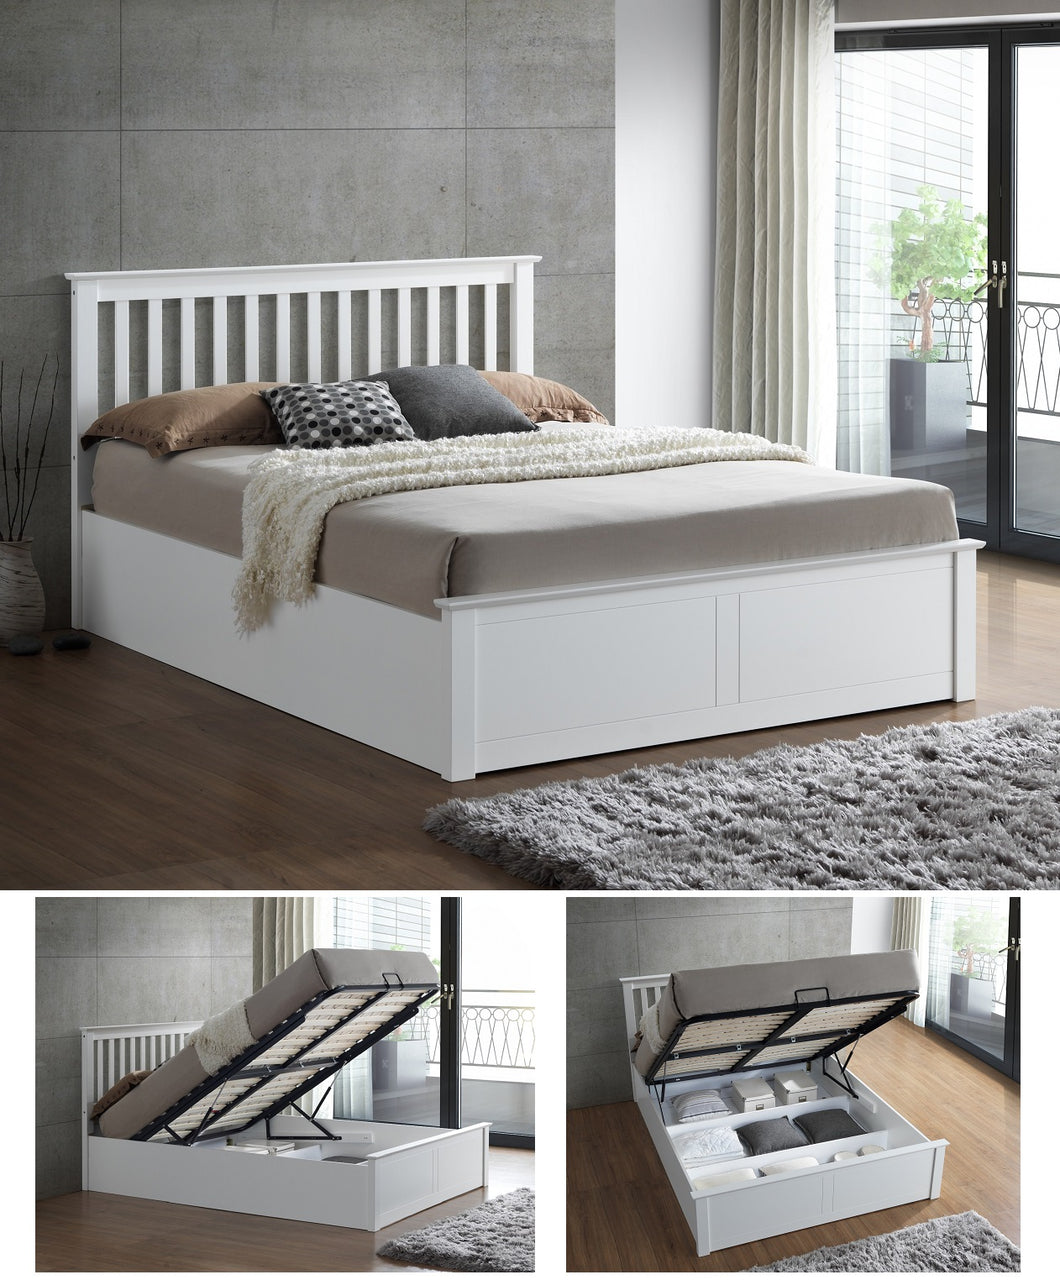 Flora Ottoman King Bed<br>£13 Per Week For 52 Weeks